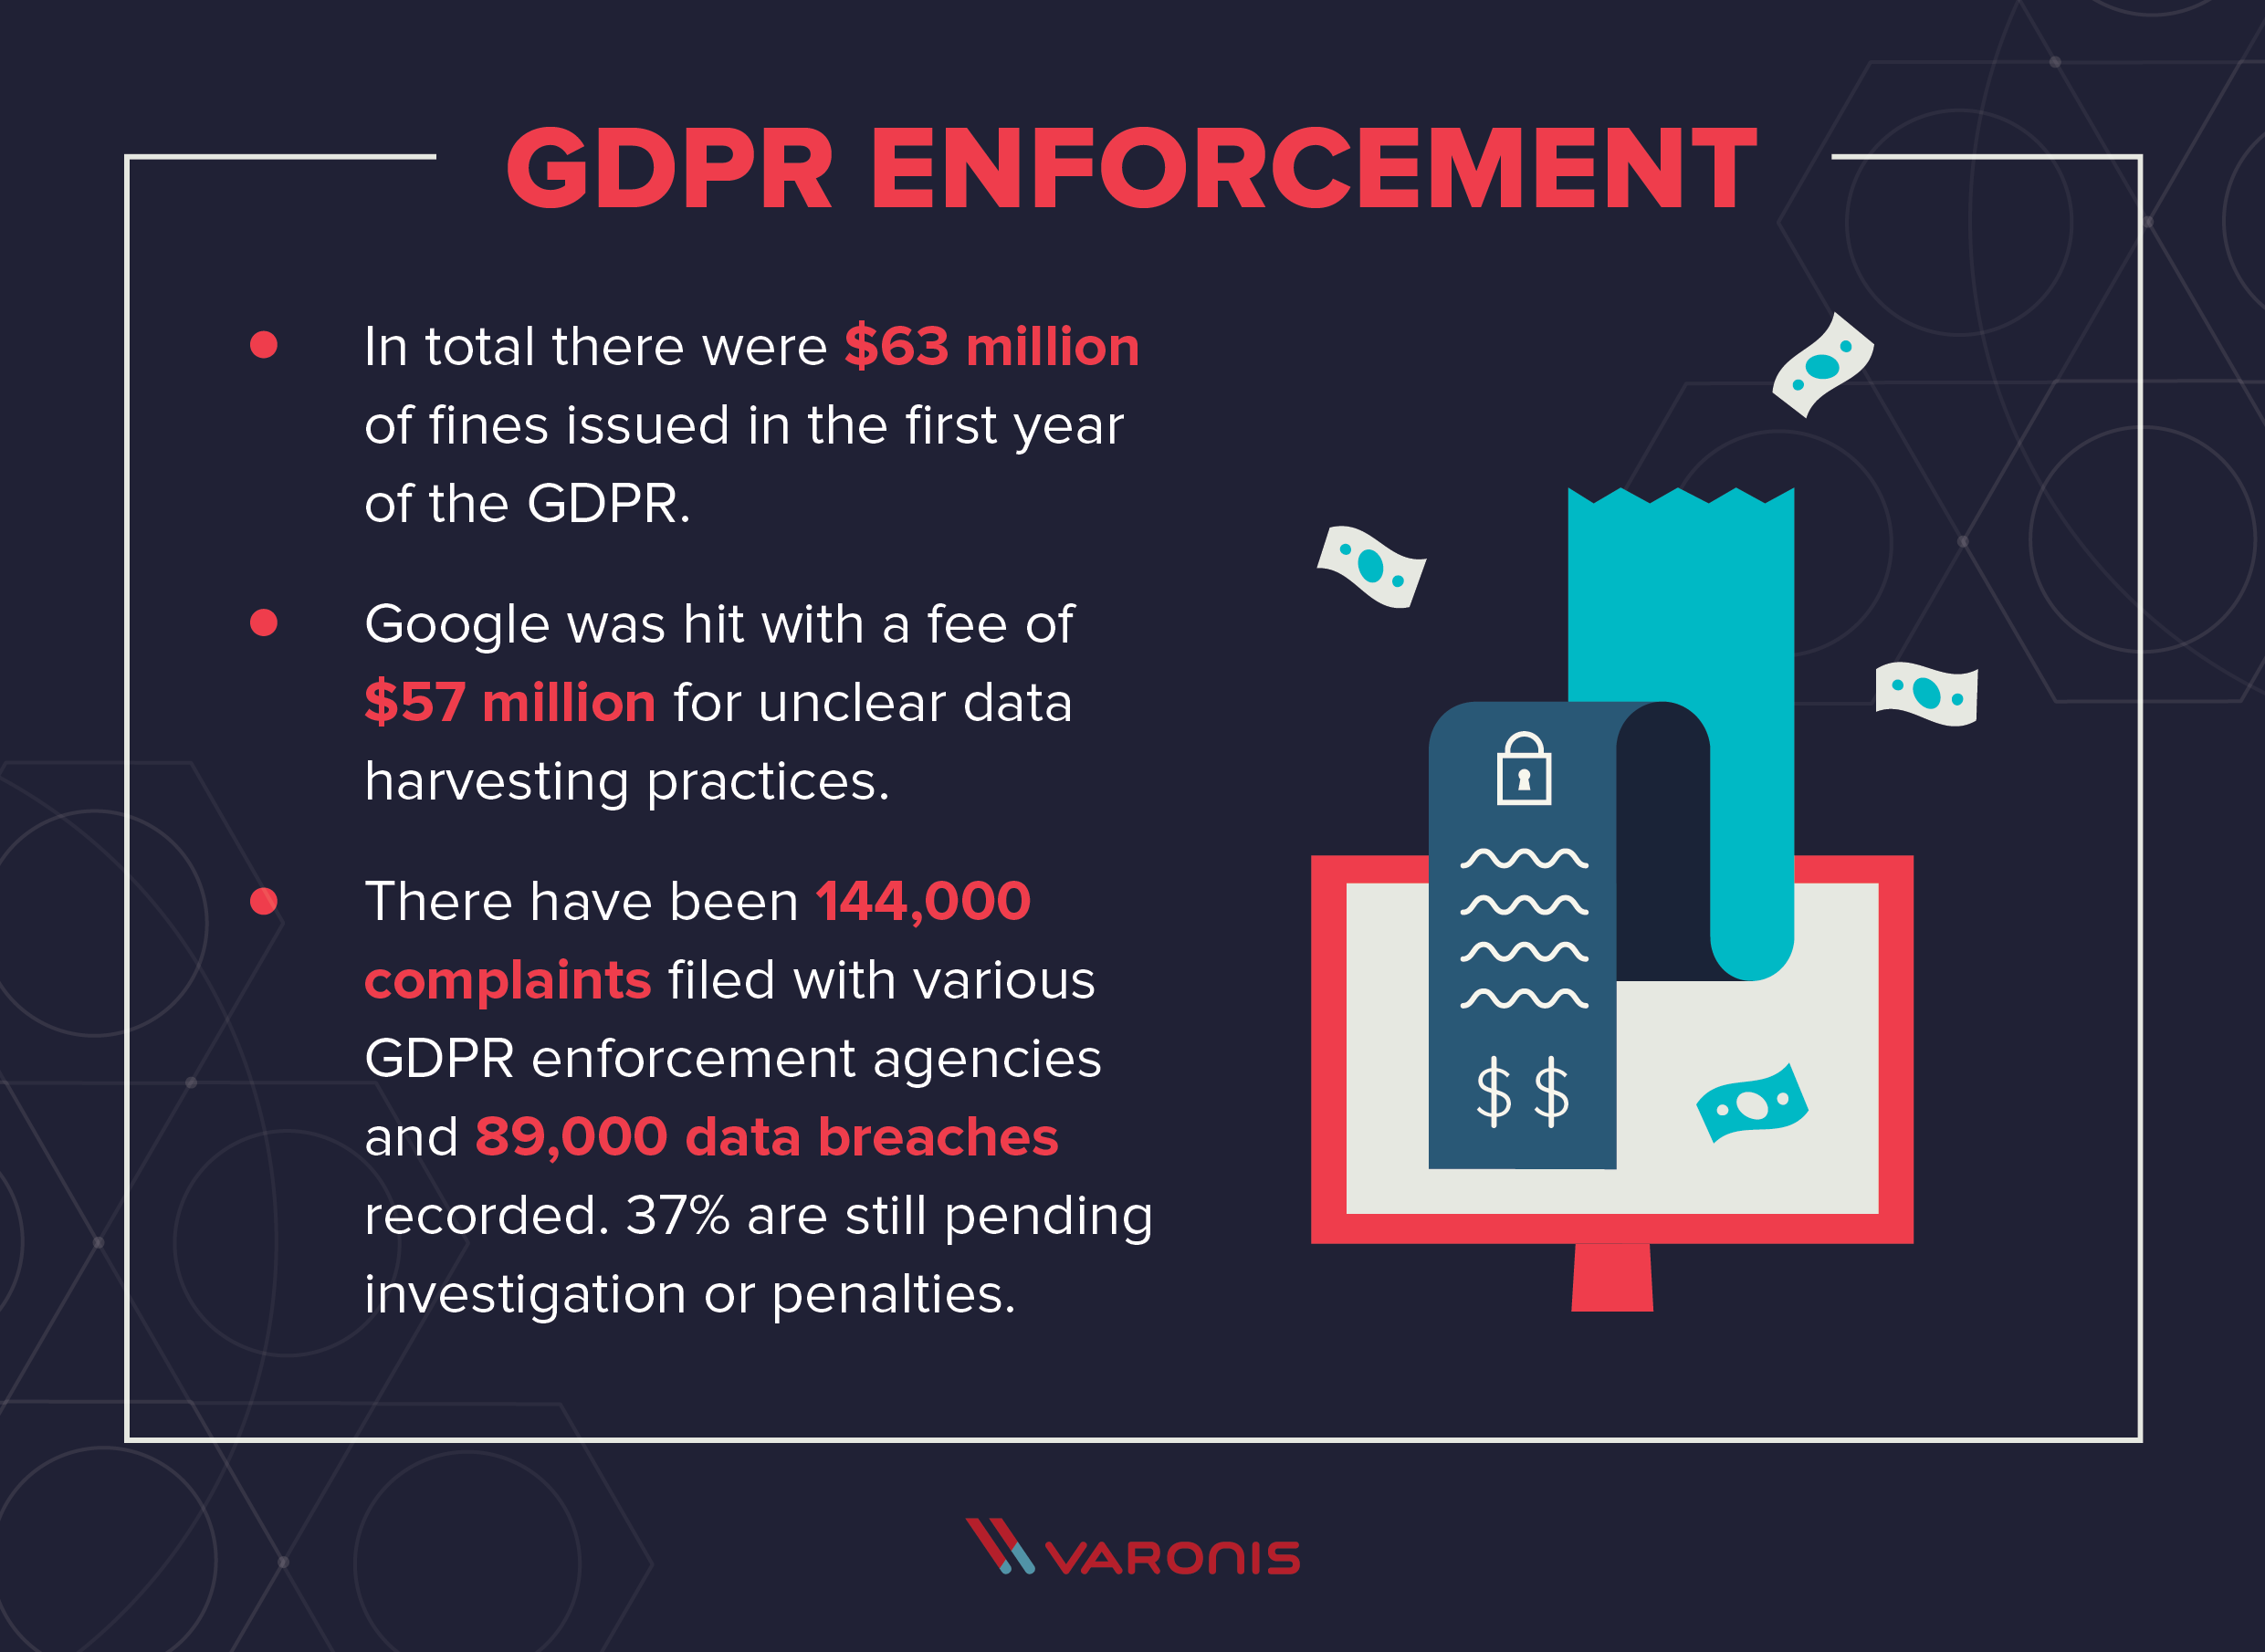 Title: GDPR Enforcement Copy: In total there were $63 million of fines issued in the first year of the GDPR. Google was hit with a fee of $57 million for unclear data harvesting practices. There have been 144,000 complaints filed with various GDPR enforcement agencies and 89,000 data breaches recorded. 37% are still pending investigation or penalties.